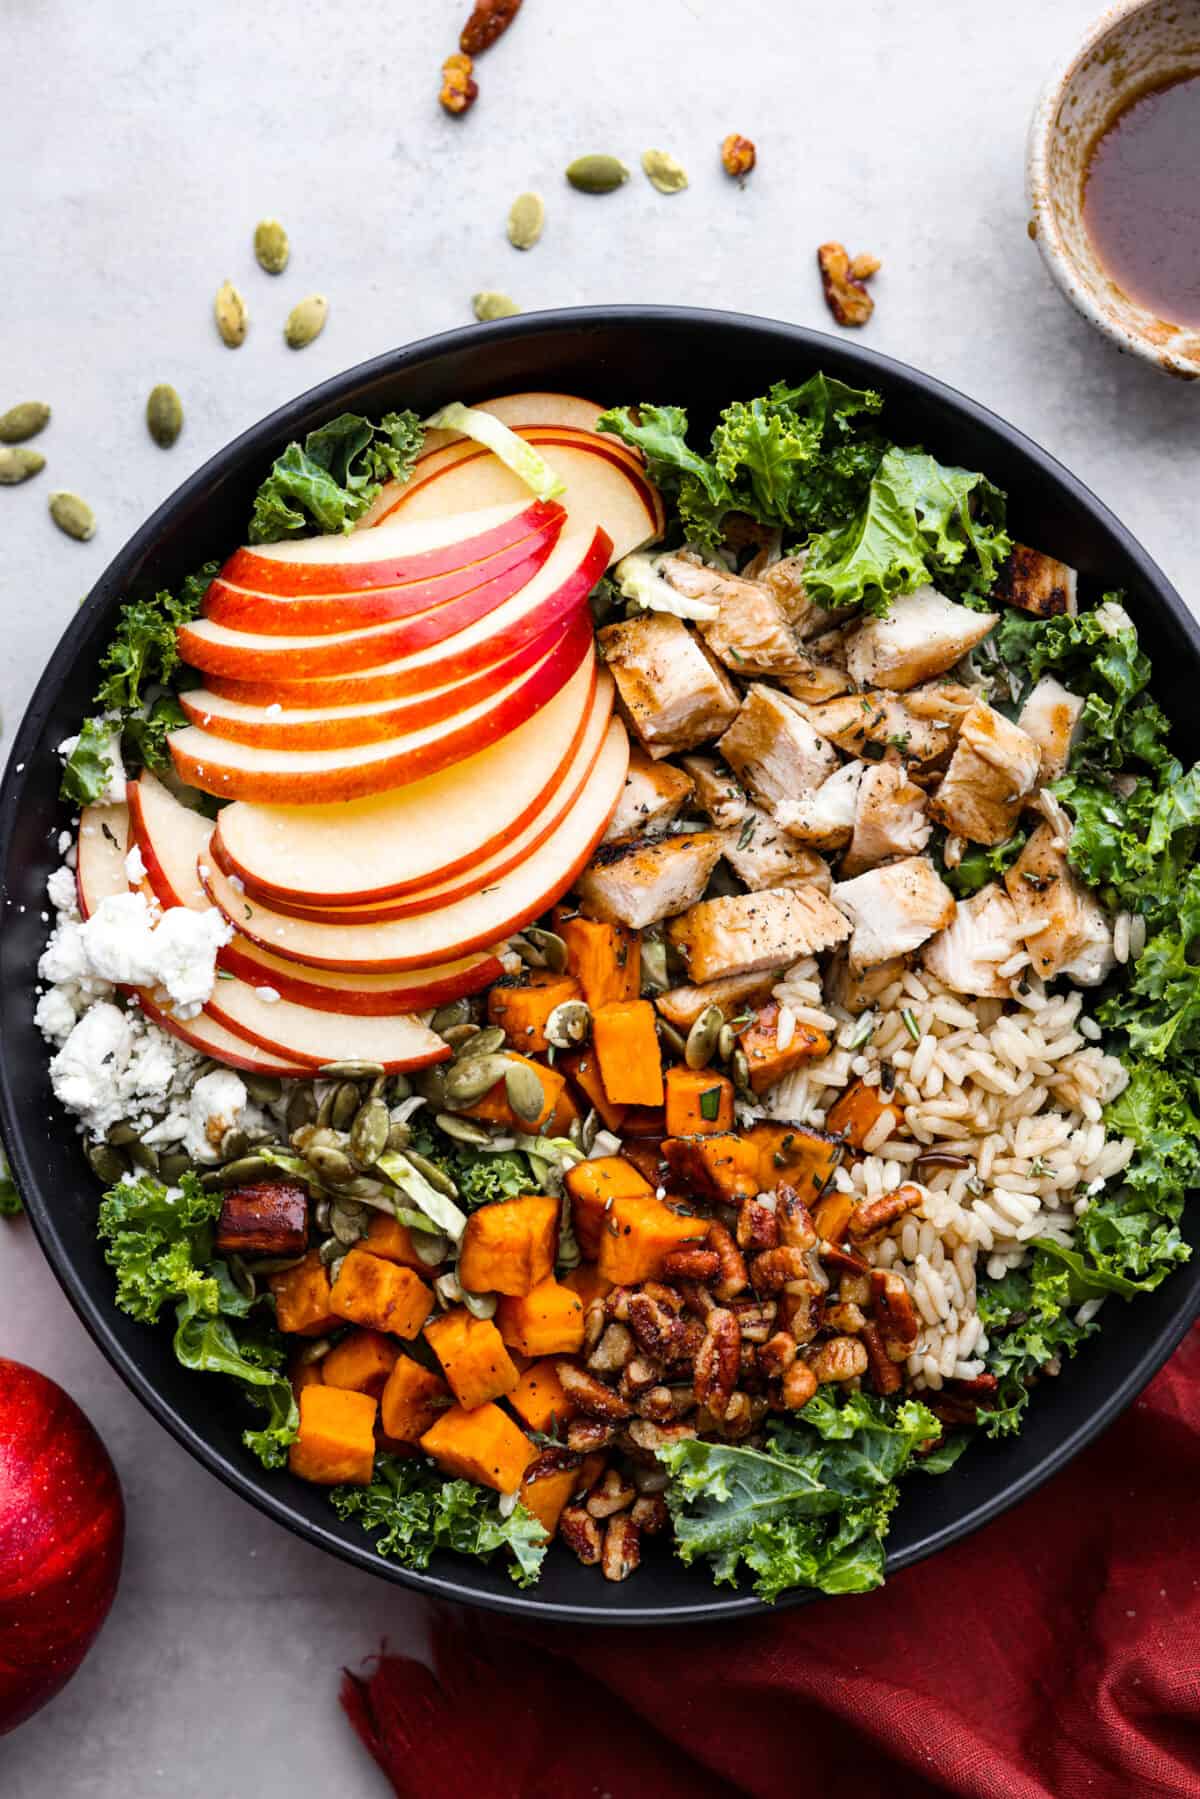 Top-down view of a salad made with kale, apples, chicken, wild rice, sweet potatoes, pecans, and goat cheese.